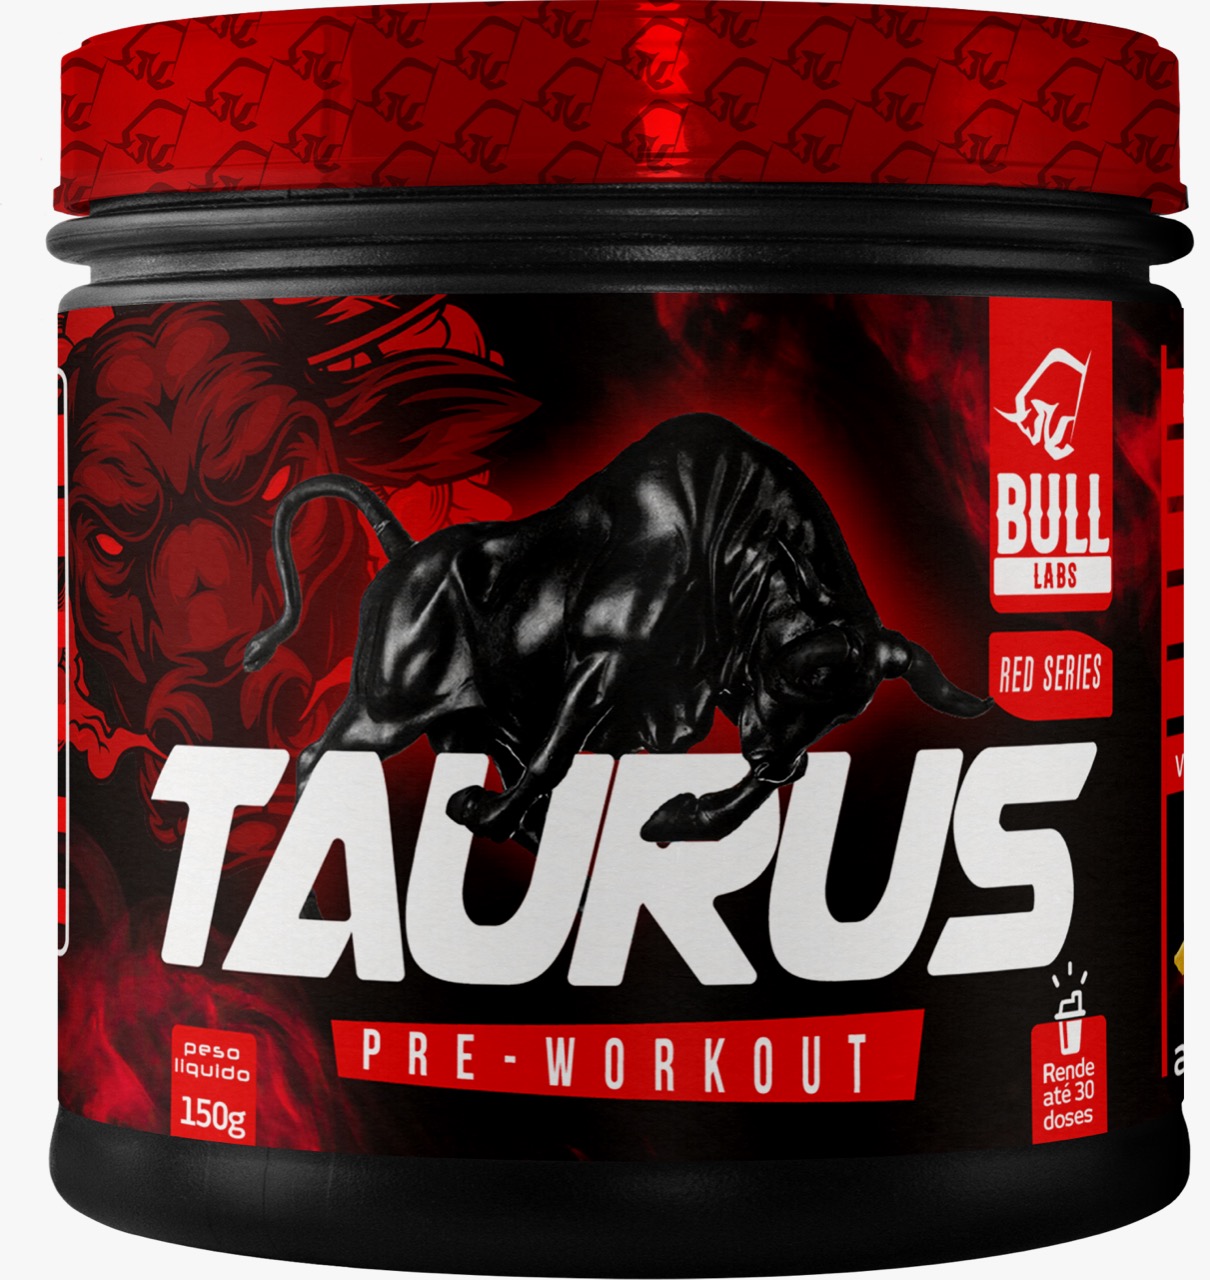 TAURUS PRE-WORKOUT 150G - BULL LABS